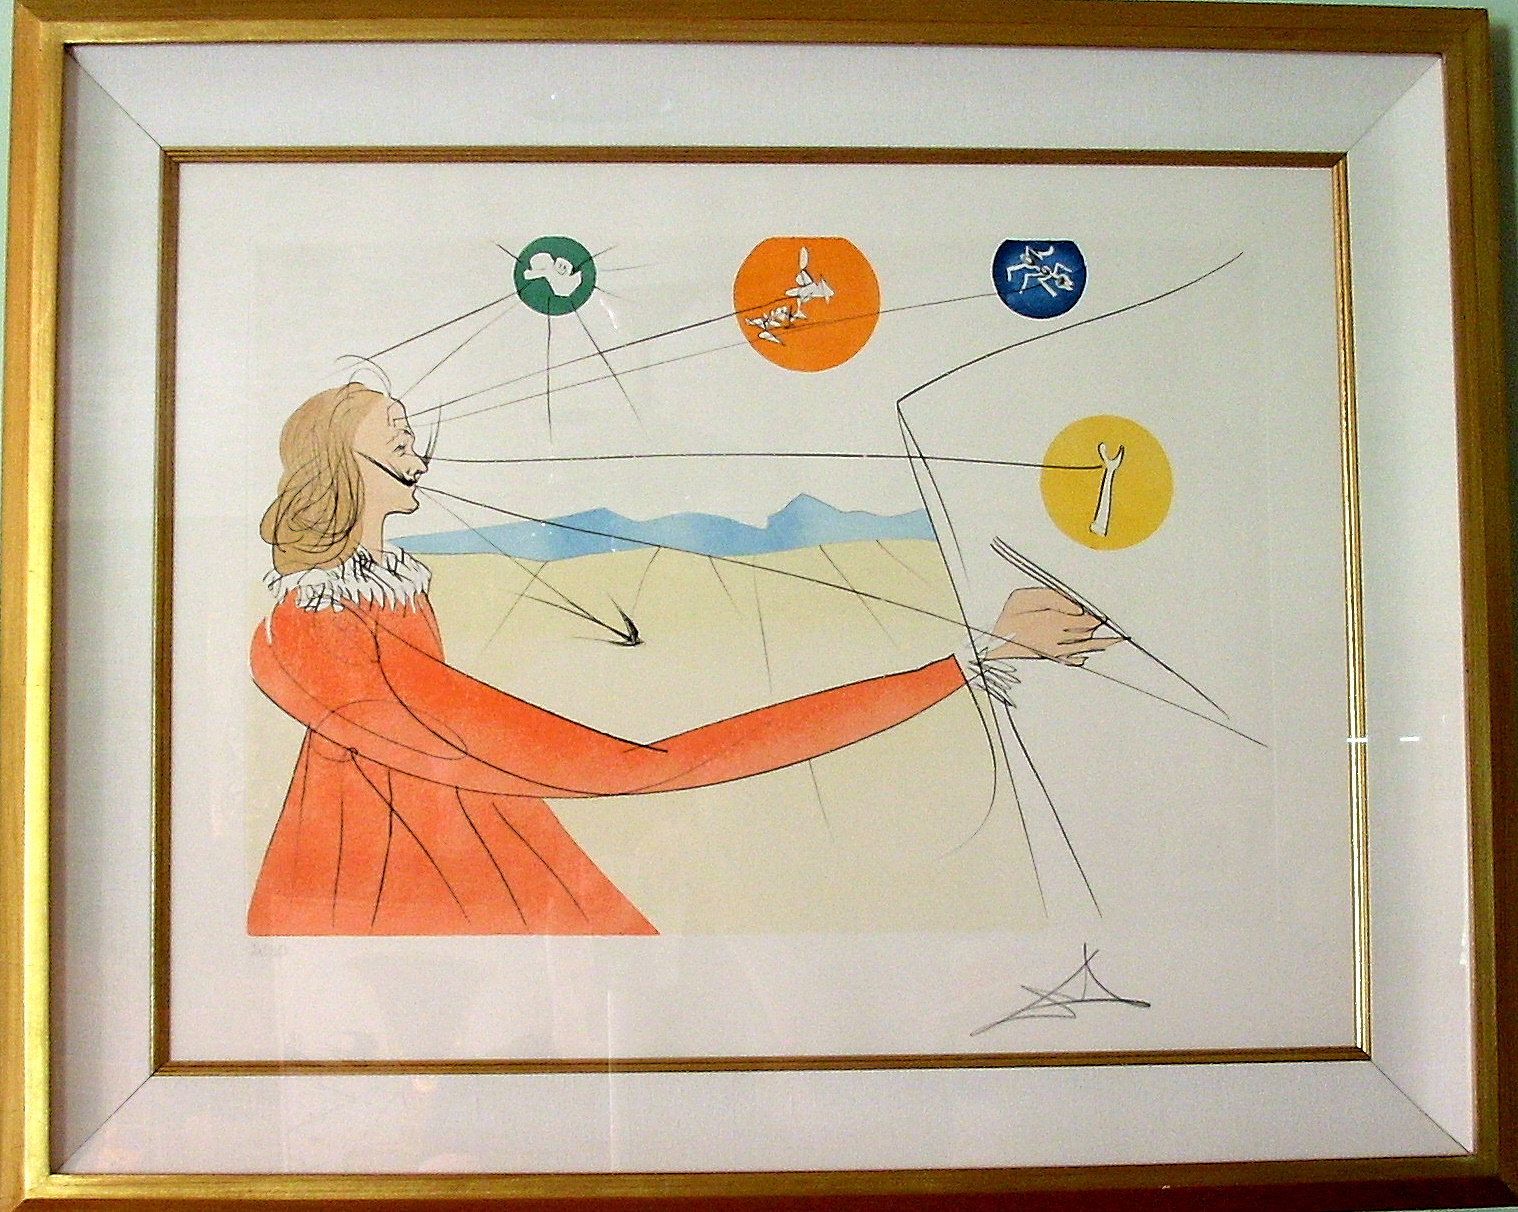 Dalinean Prophecy by Salvador Dali | Lithograph